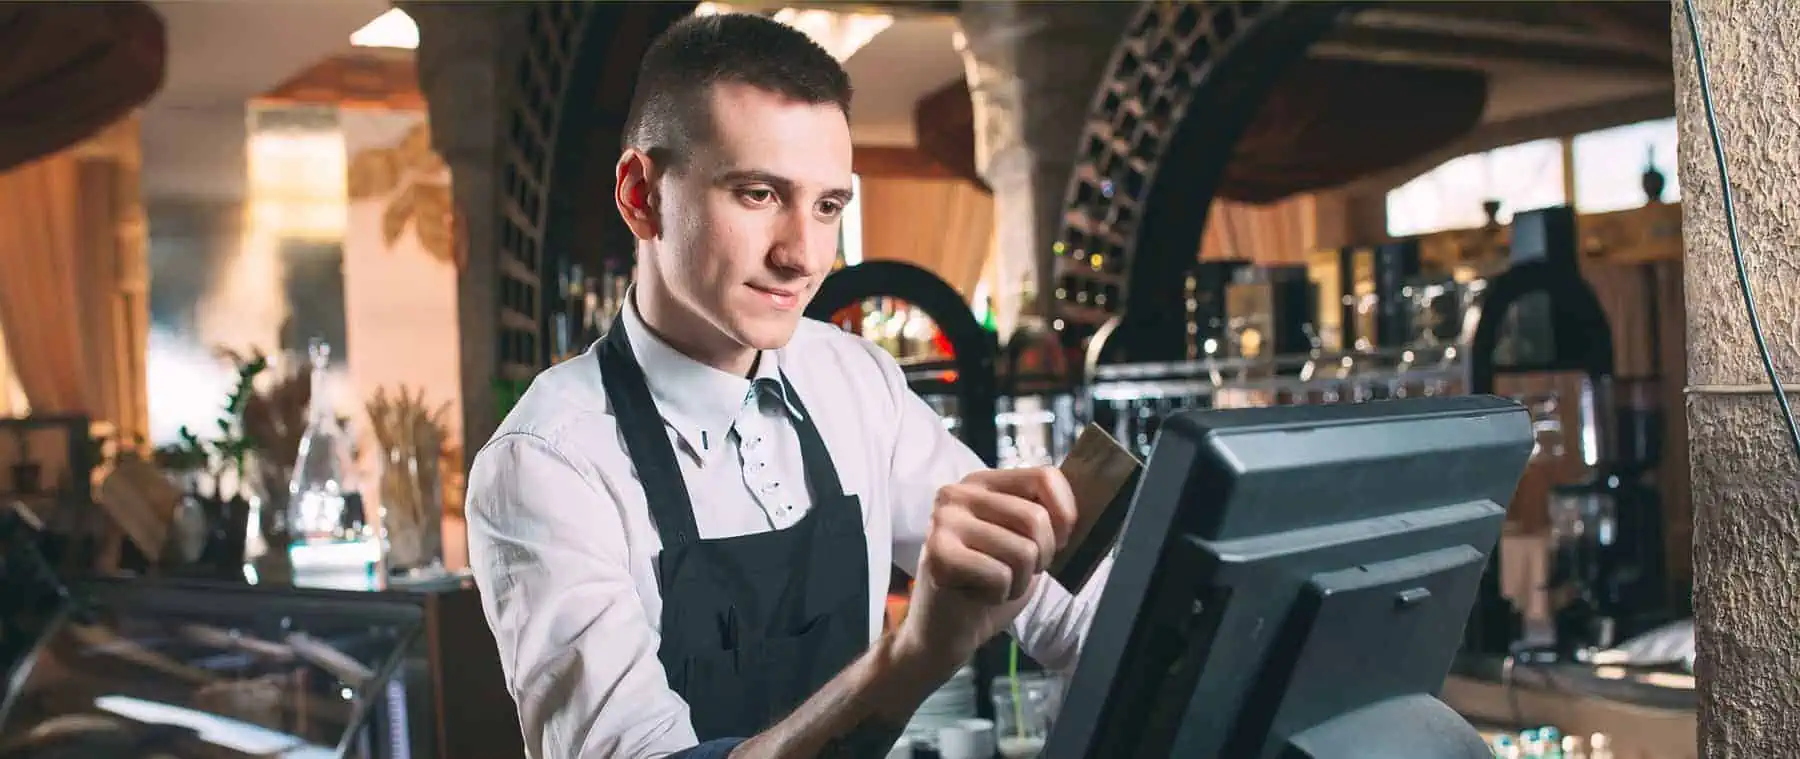 bartender enters order on point of sale with credit card